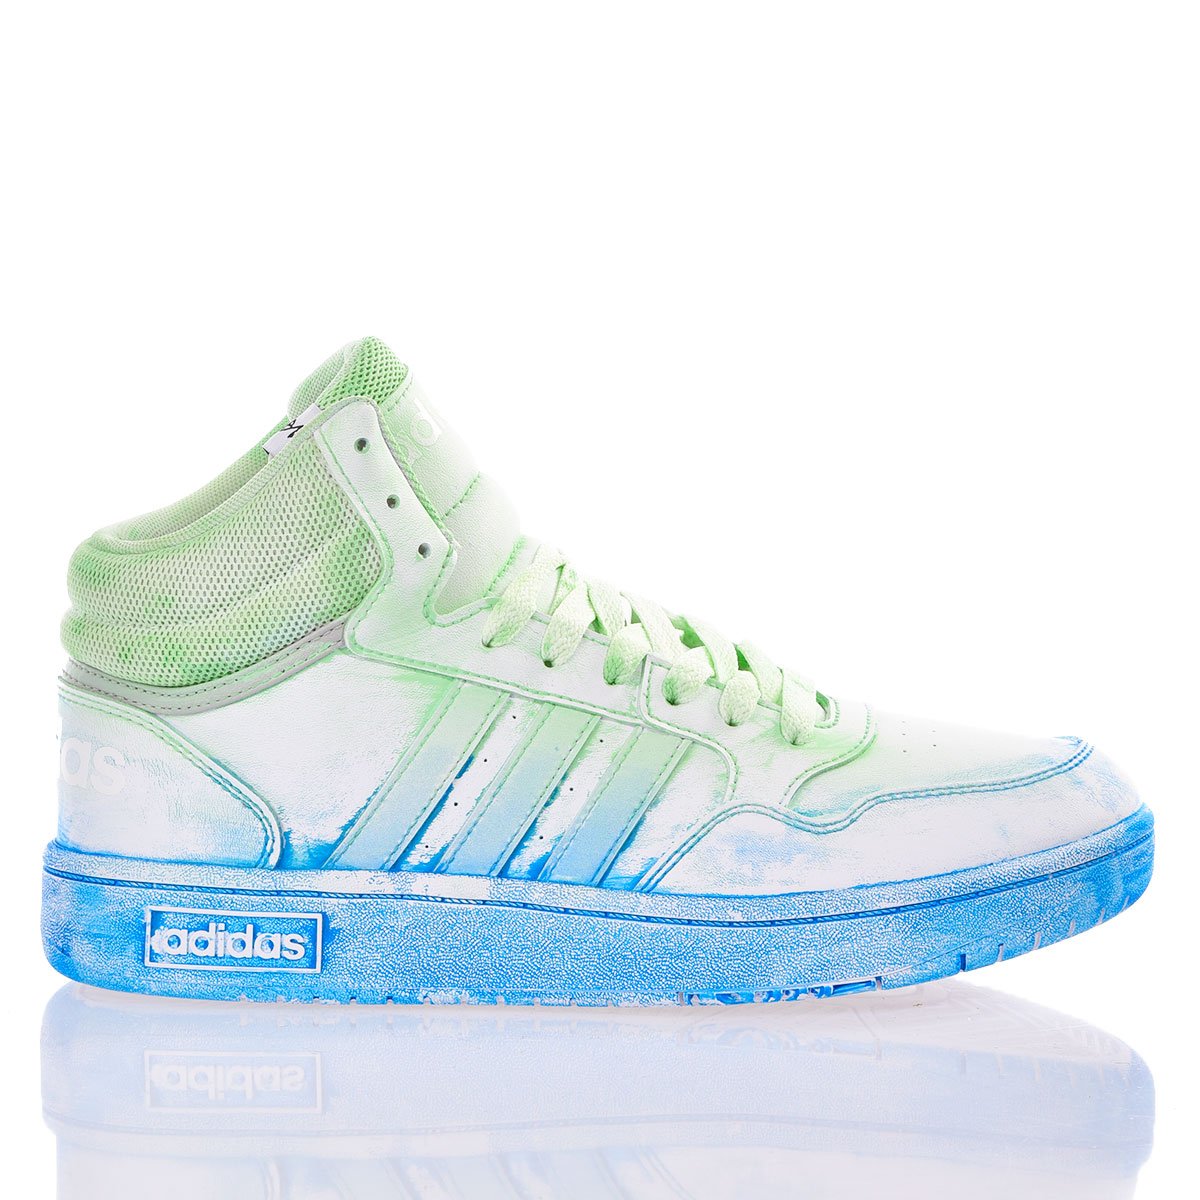 Adidas Tropical Top Ten Washed-out